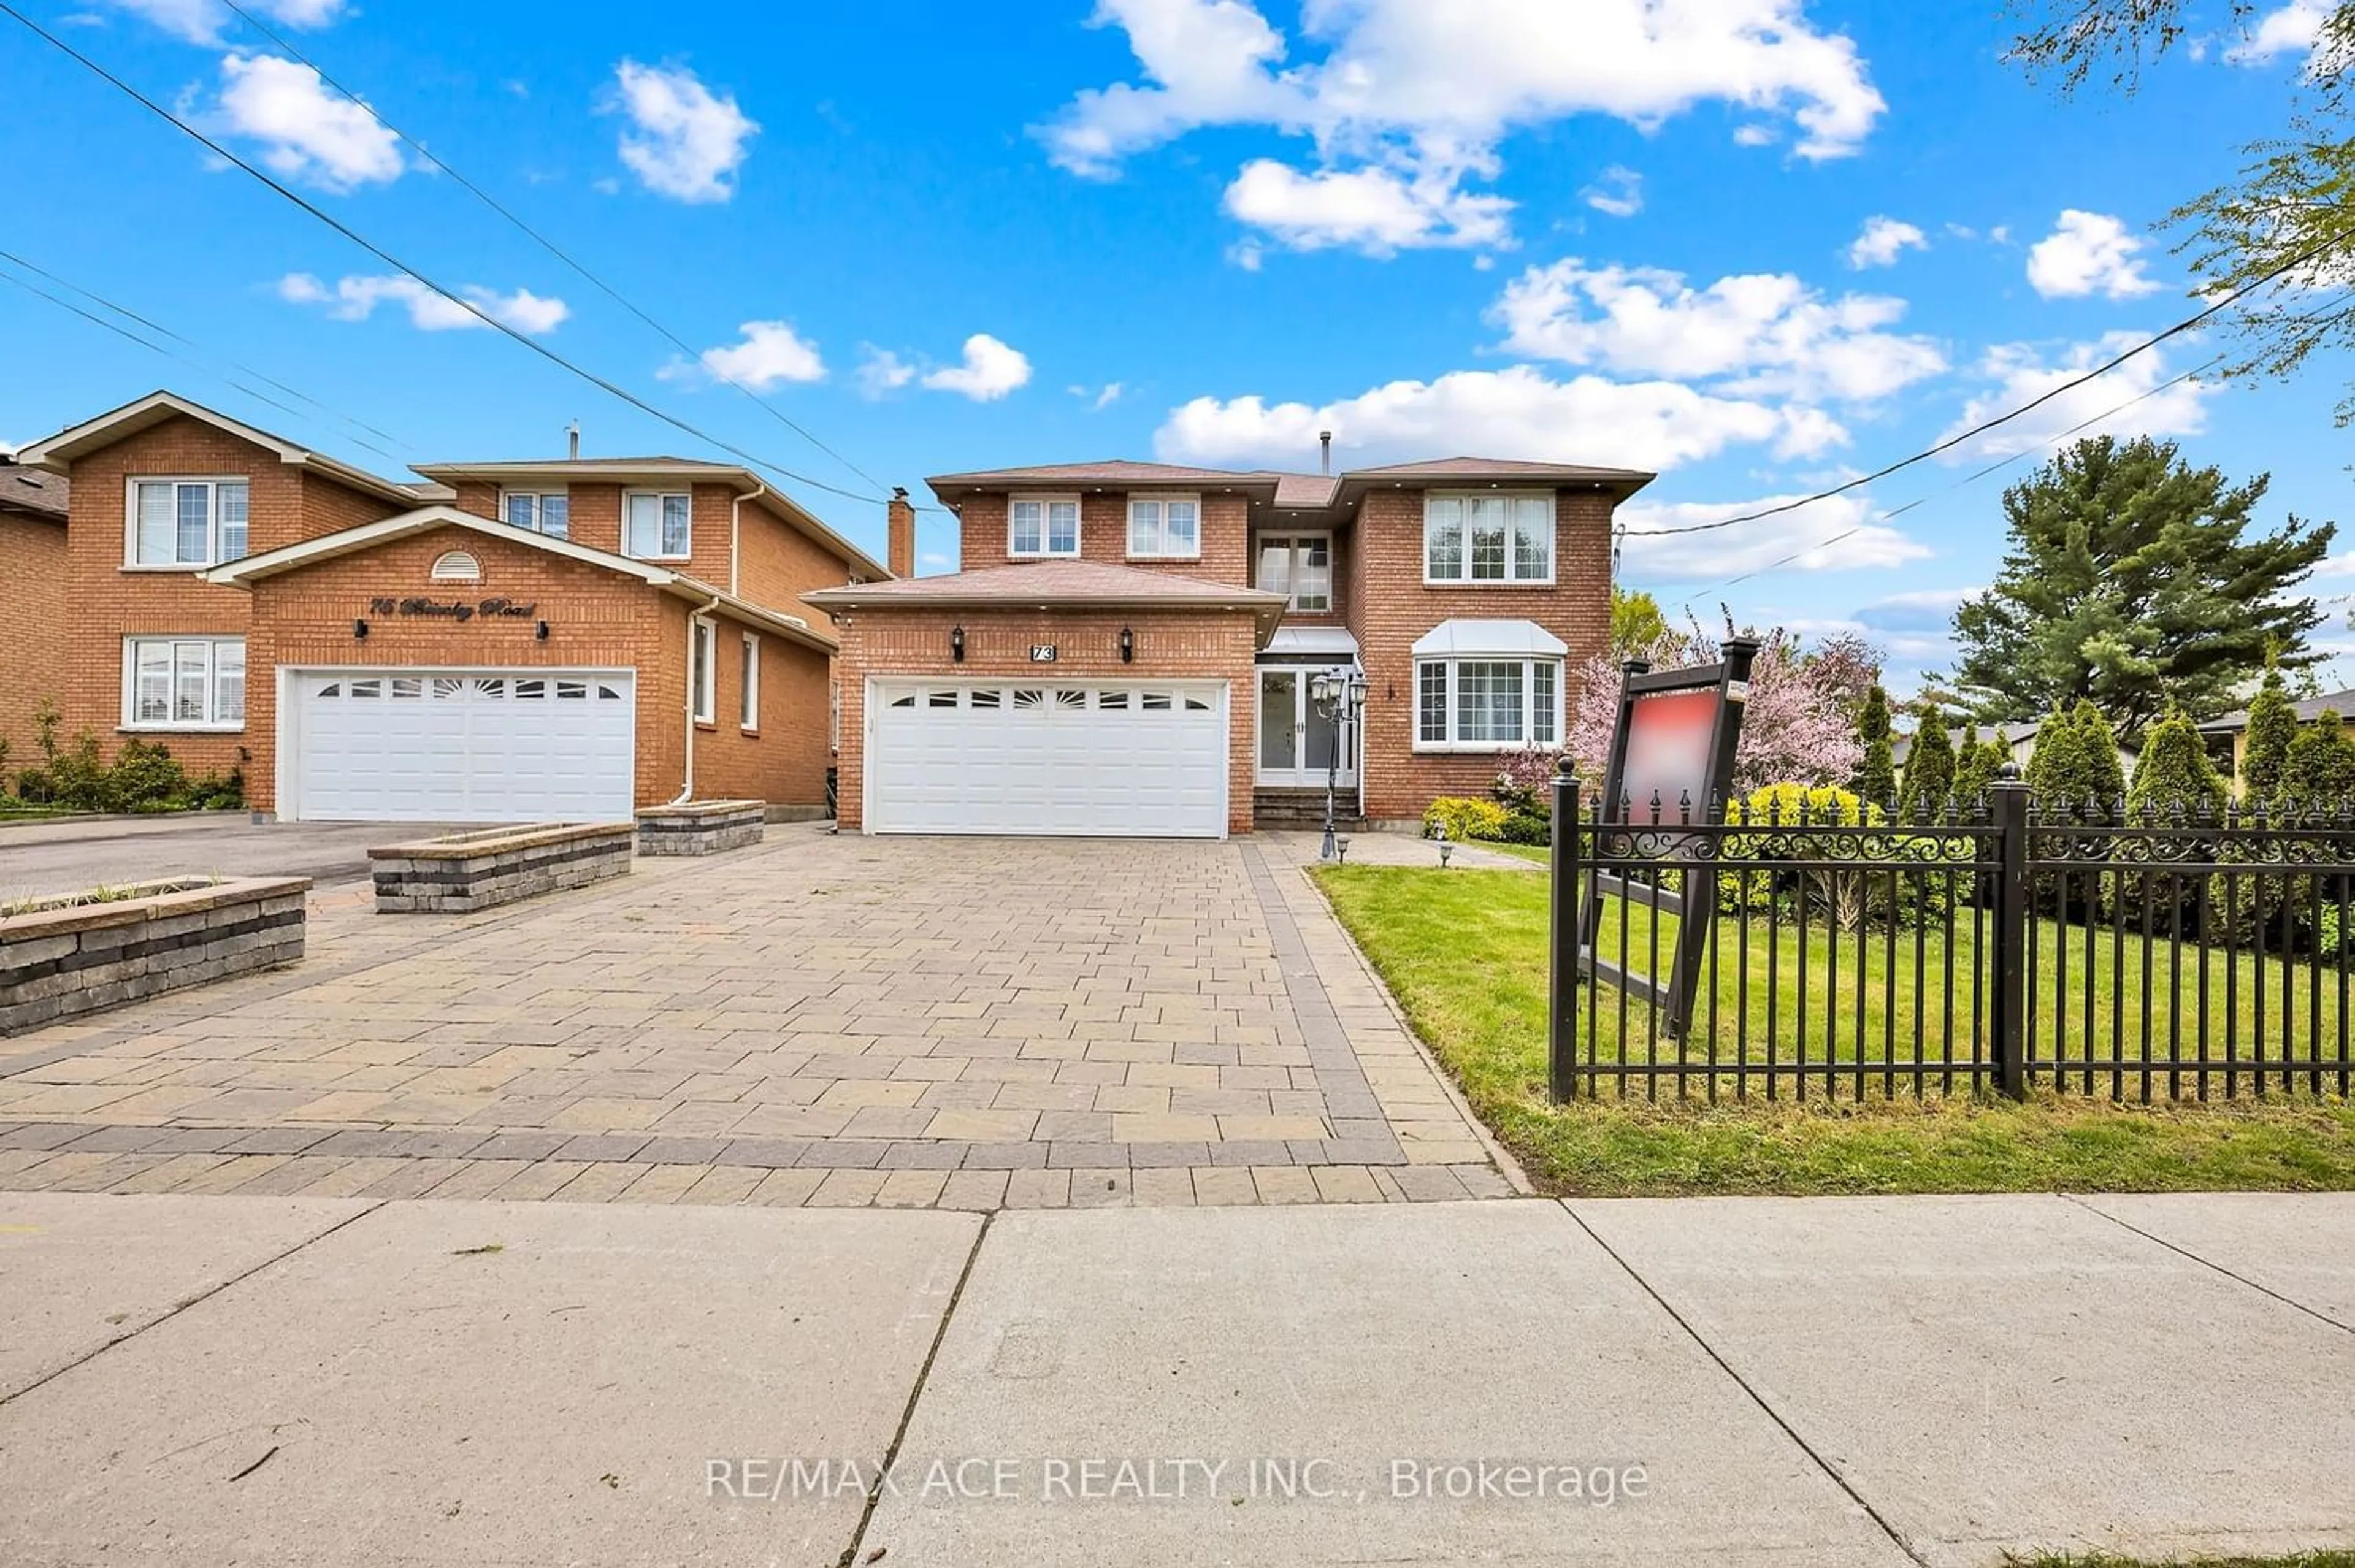 Frontside or backside of a home for 73 Brimley Rd, Toronto Ontario M1M 3H7